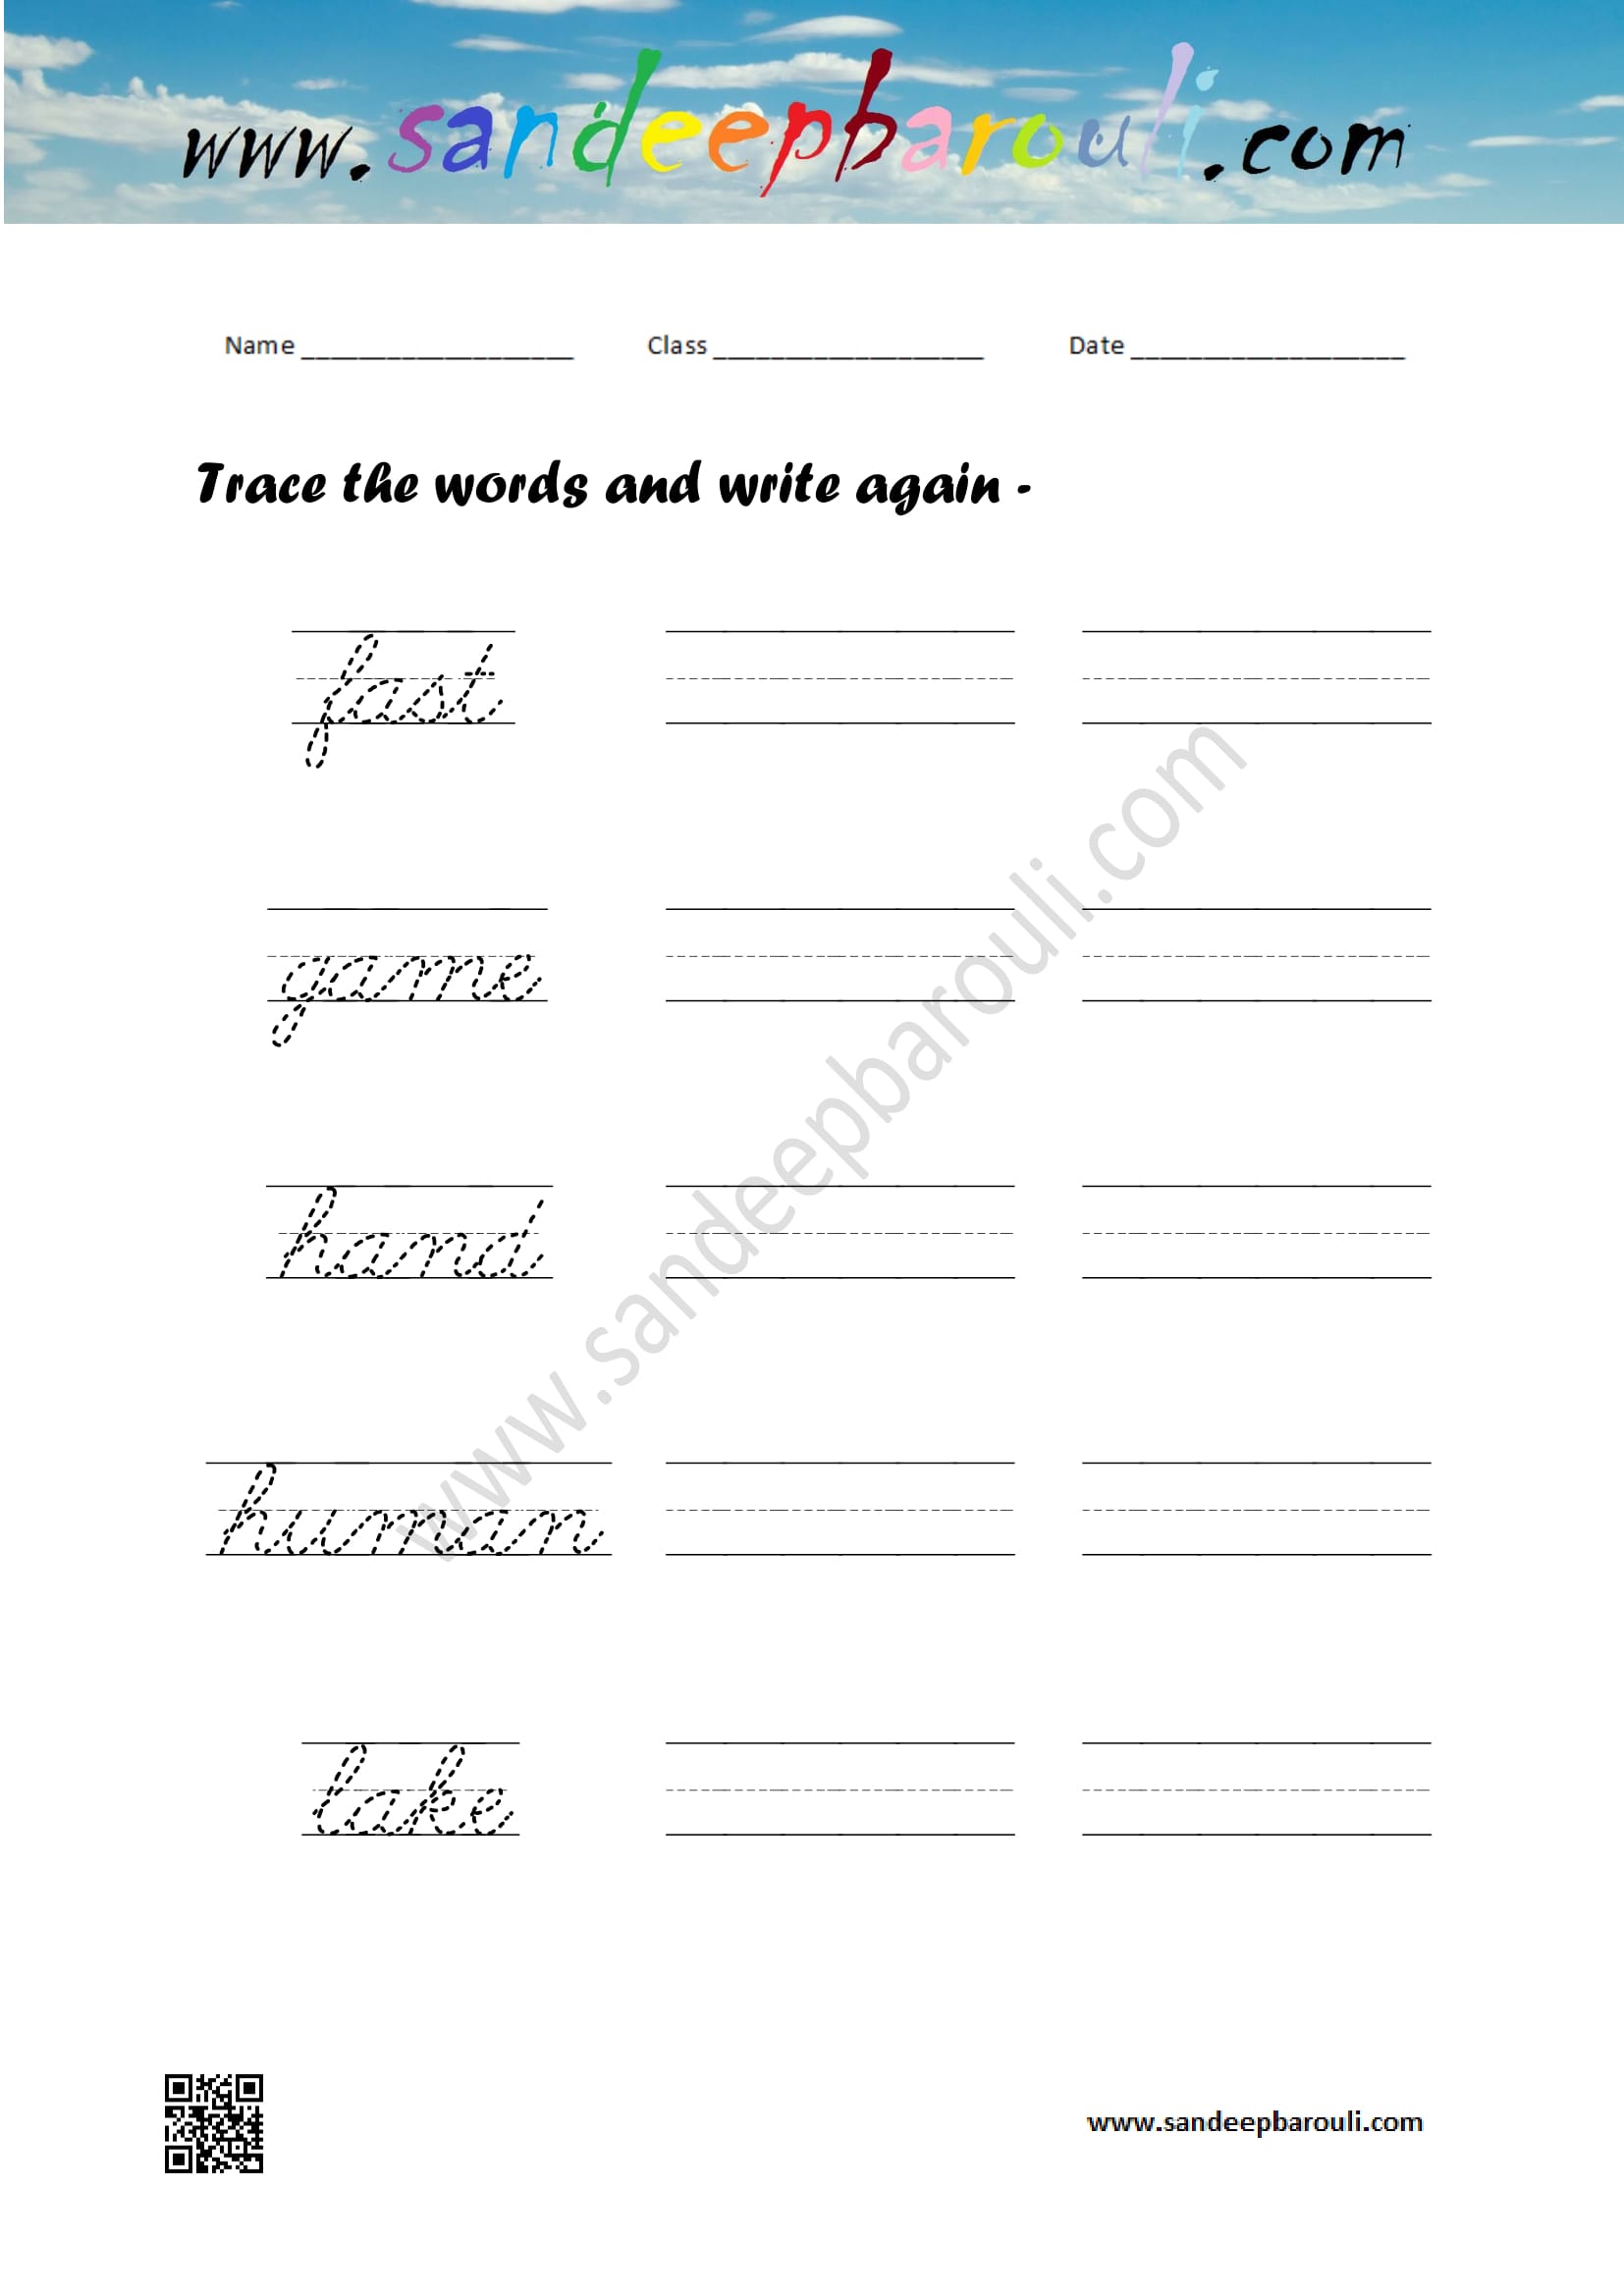 Cursive writing worksheet – trace the words and write again (69)